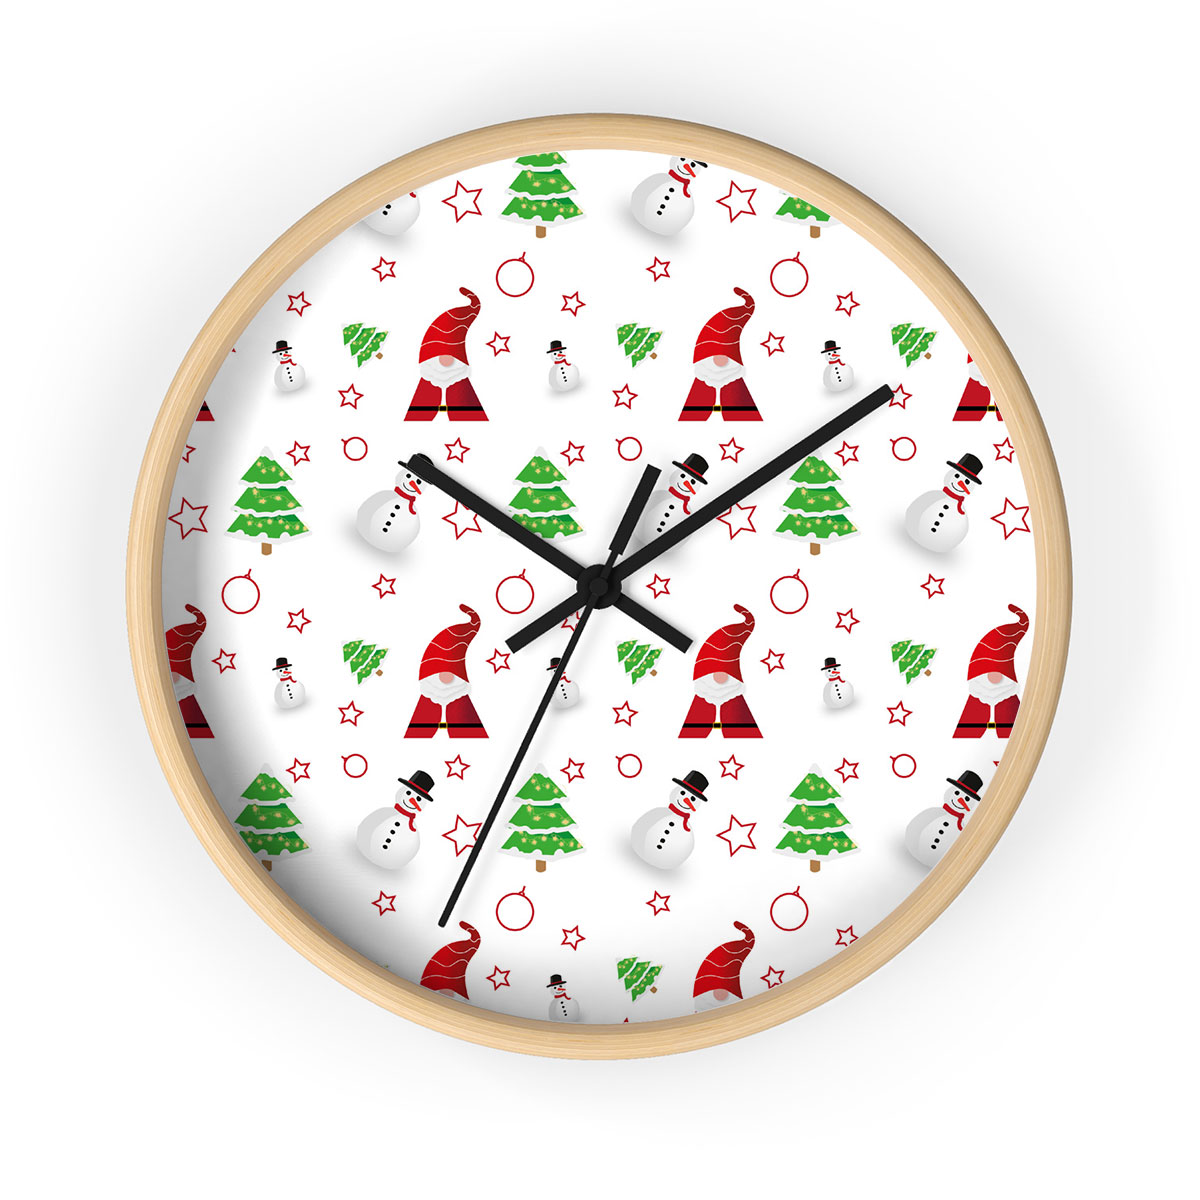 Santa Claus, Snowman Clipart And Pine Tree Silhouette Seamless Pattern Printed Wooden Wall Clock